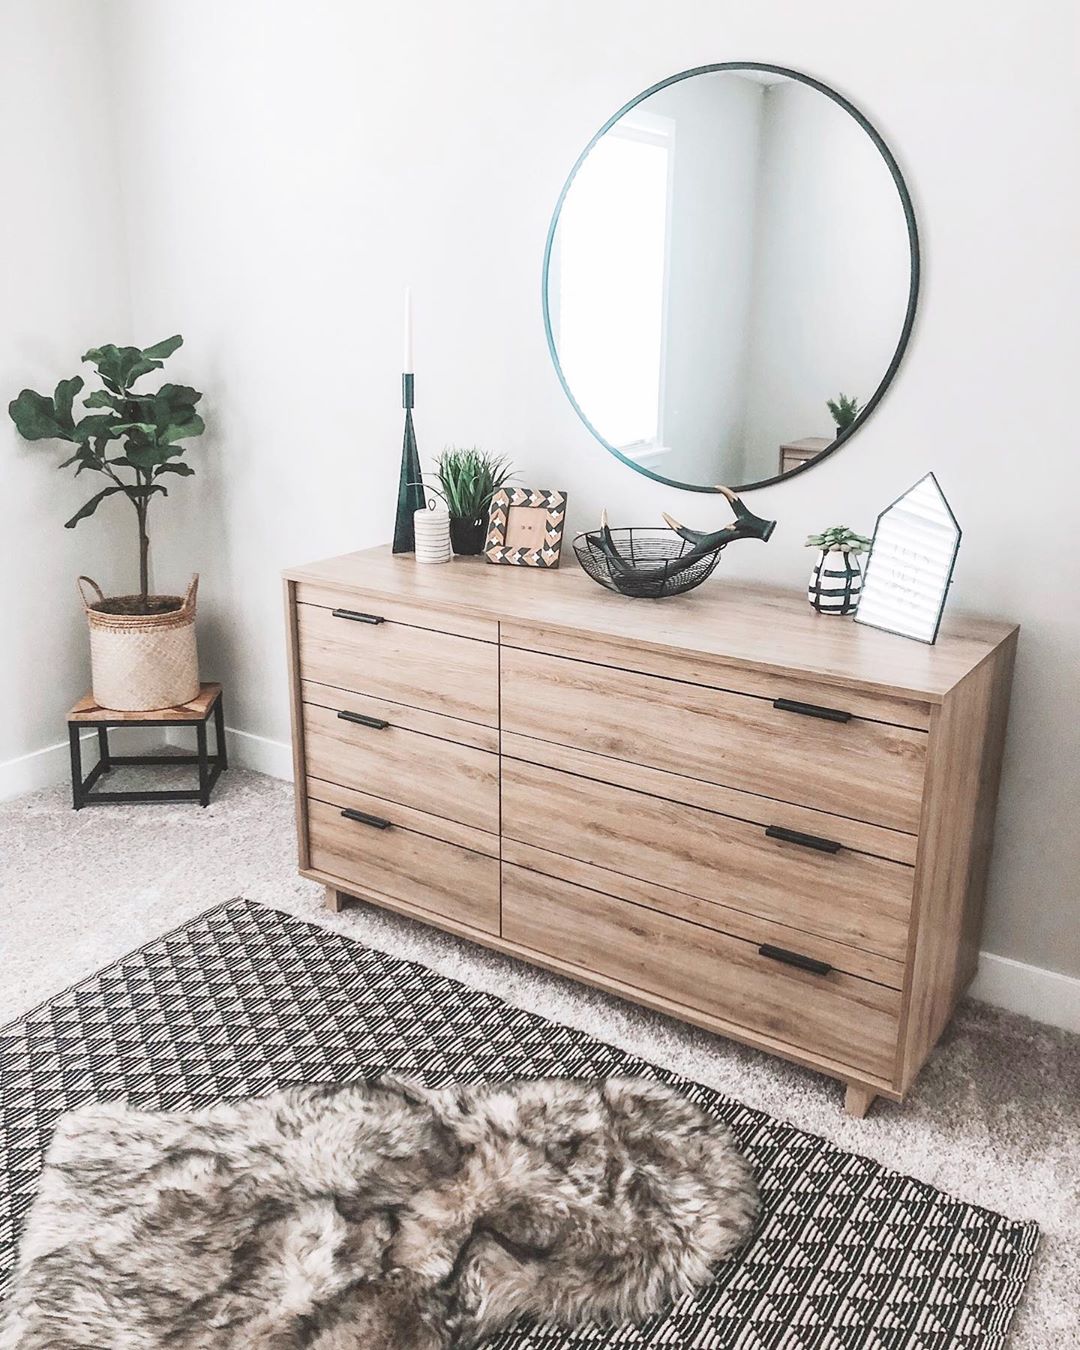 Minimalist bedroom with patterned rug and dresser. Photo by Instagram user @homesweethorton